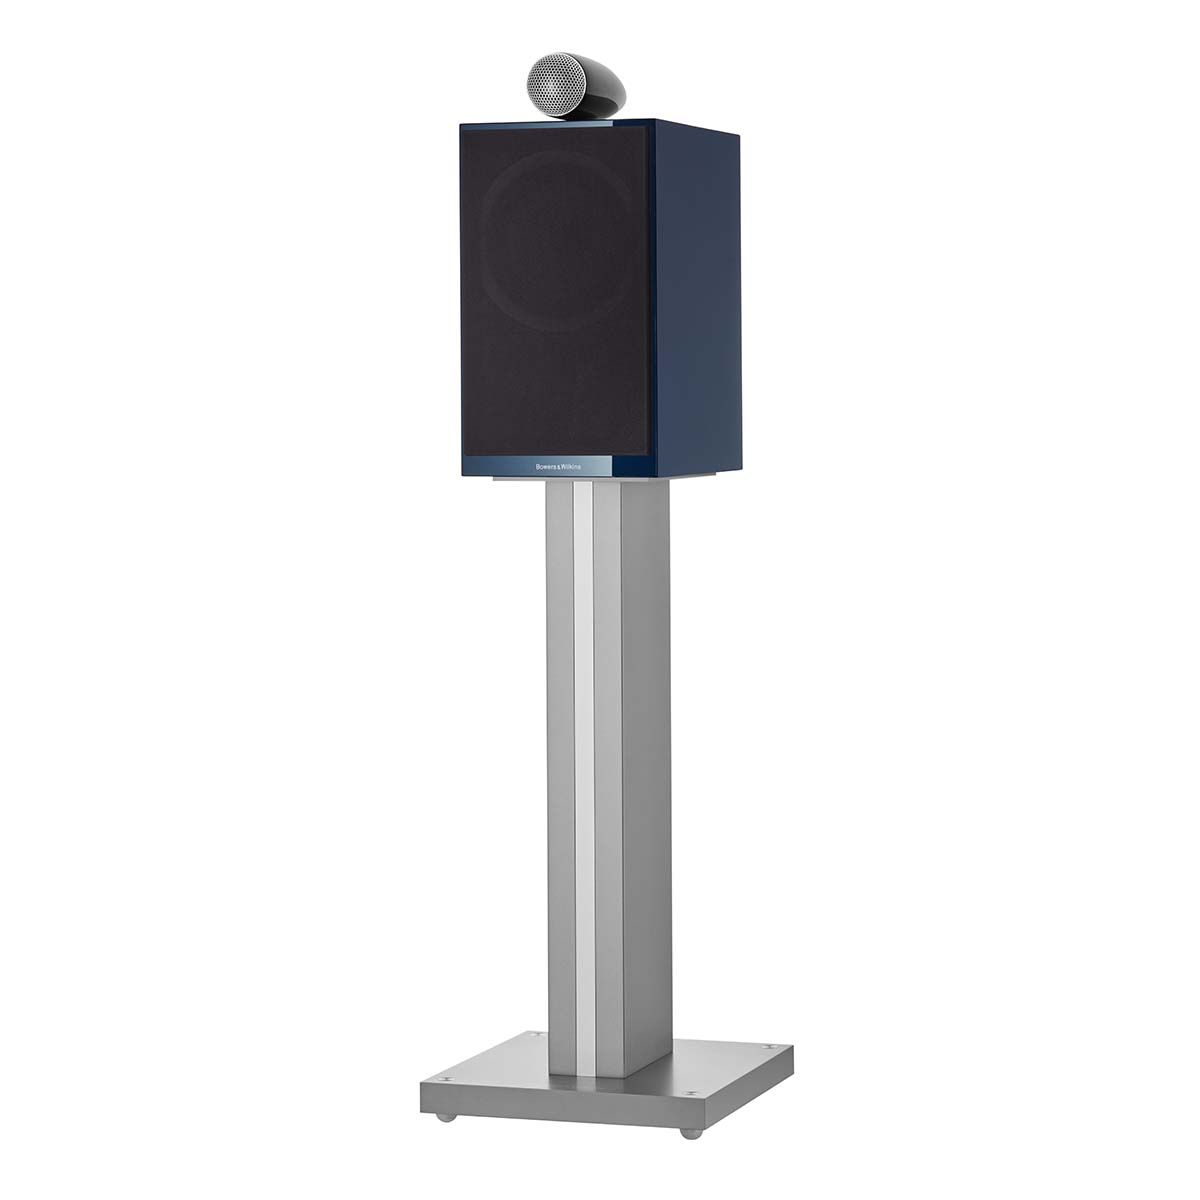 Bowers & Wilkins 705 Signature Speakers, Midnight Blue Metallic, front angle with grille